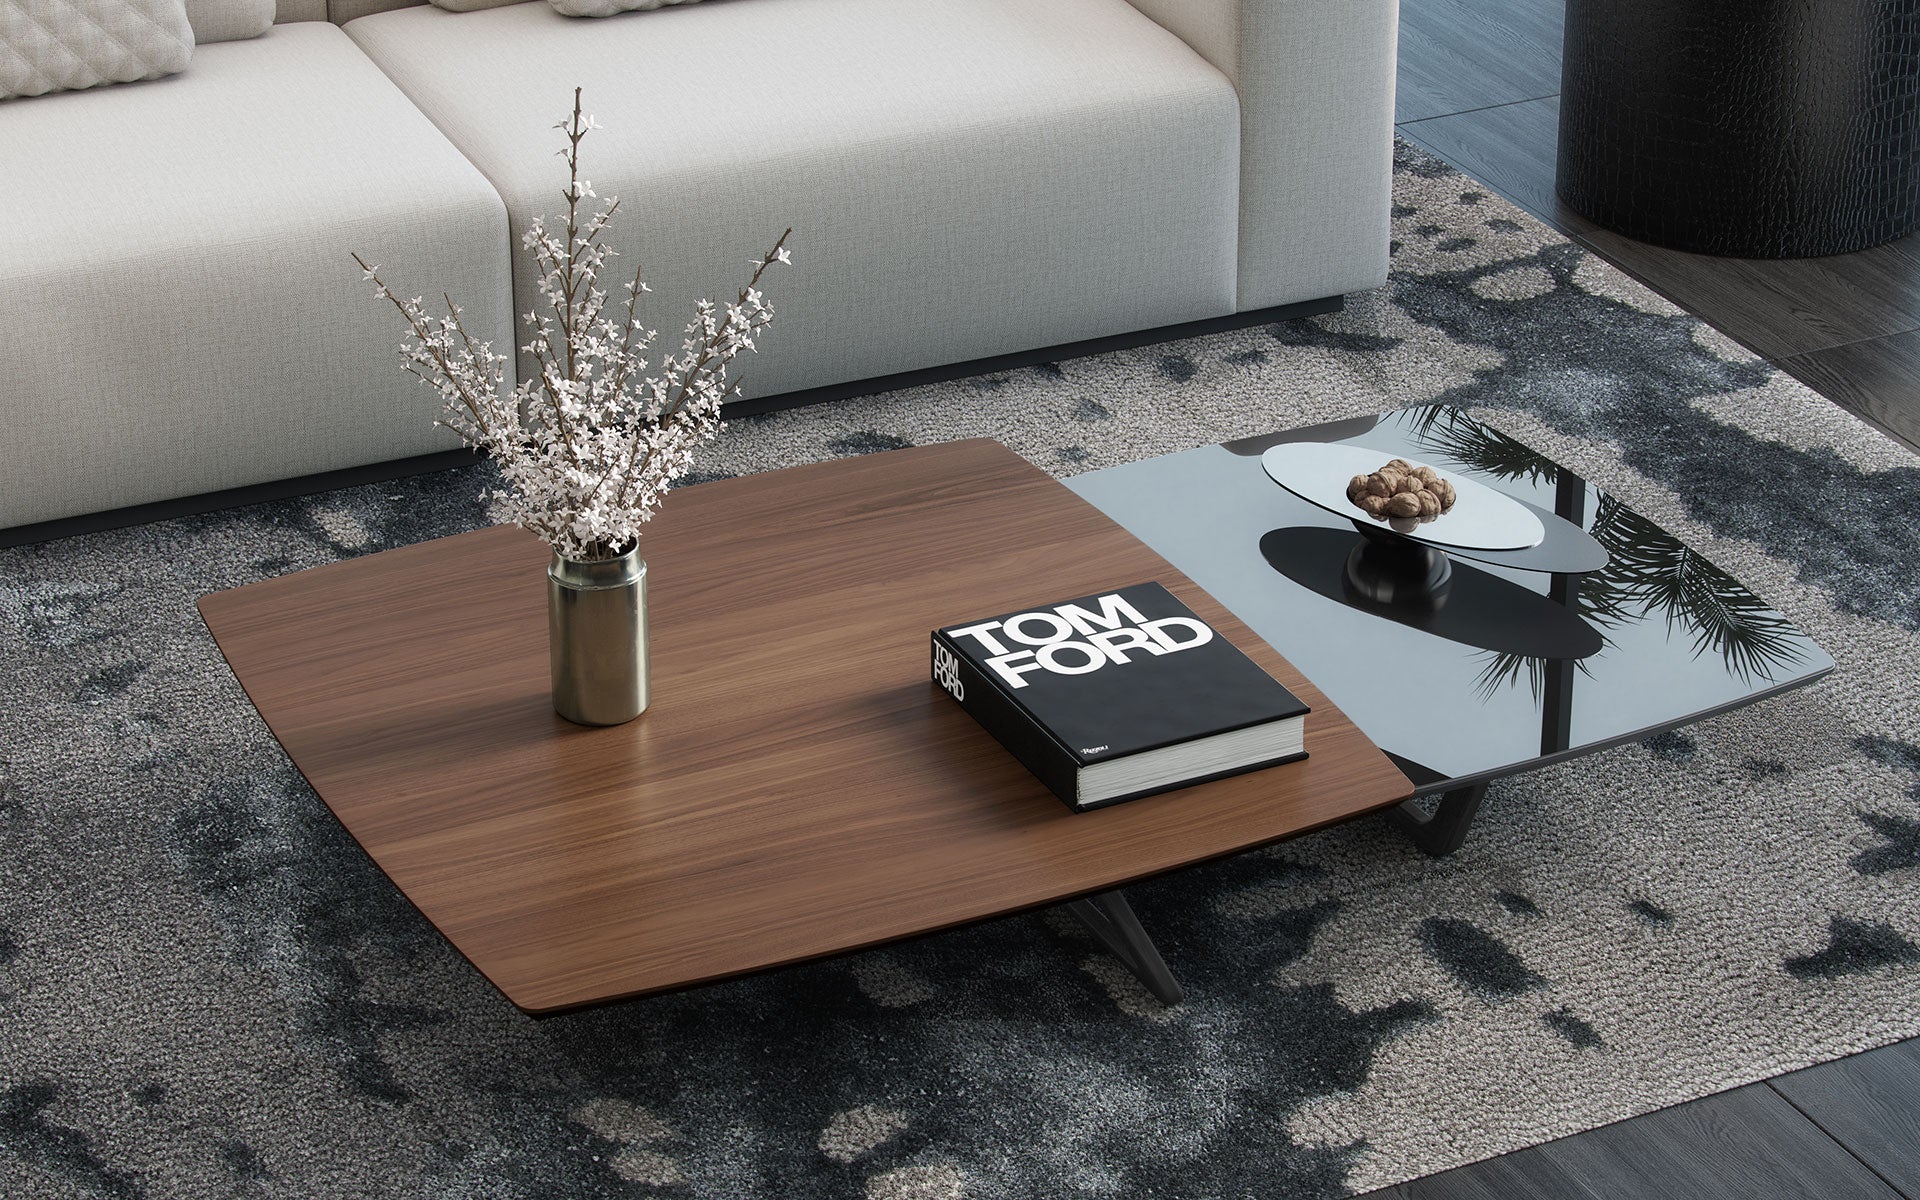 A Tom Ford book sitting on a wooden coffee table.